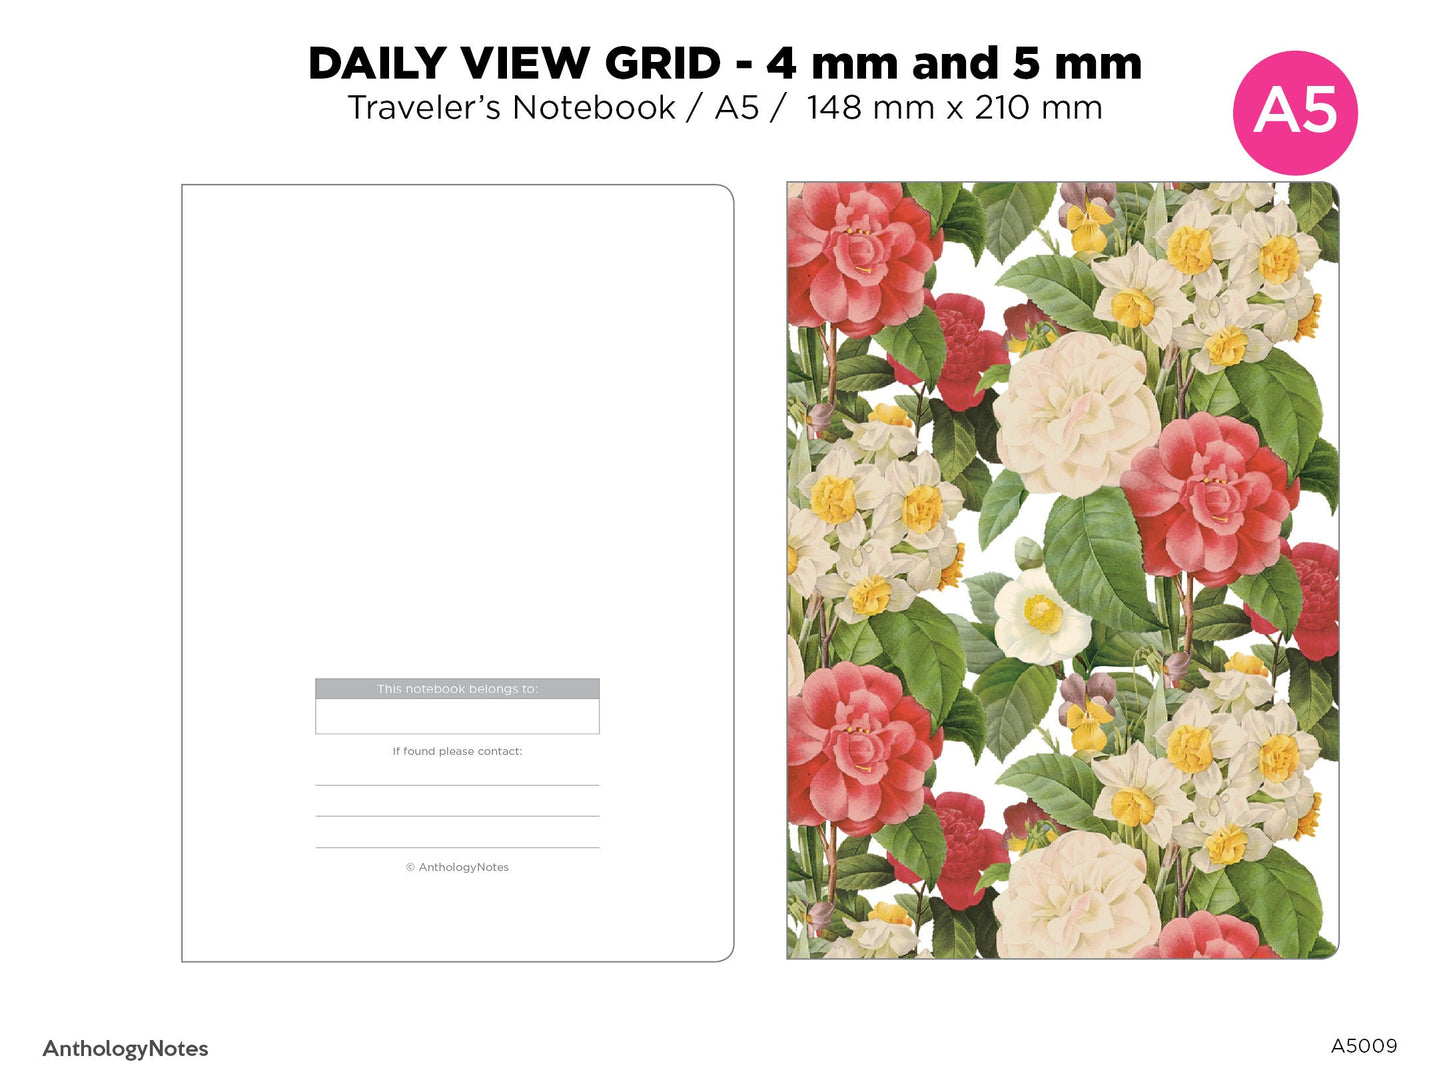 A5 TN Daily View GRID Traveler's Notebook Printable Insert Minimalist, 4 mm x 4 mm and 5 mm x 5 mm A5009